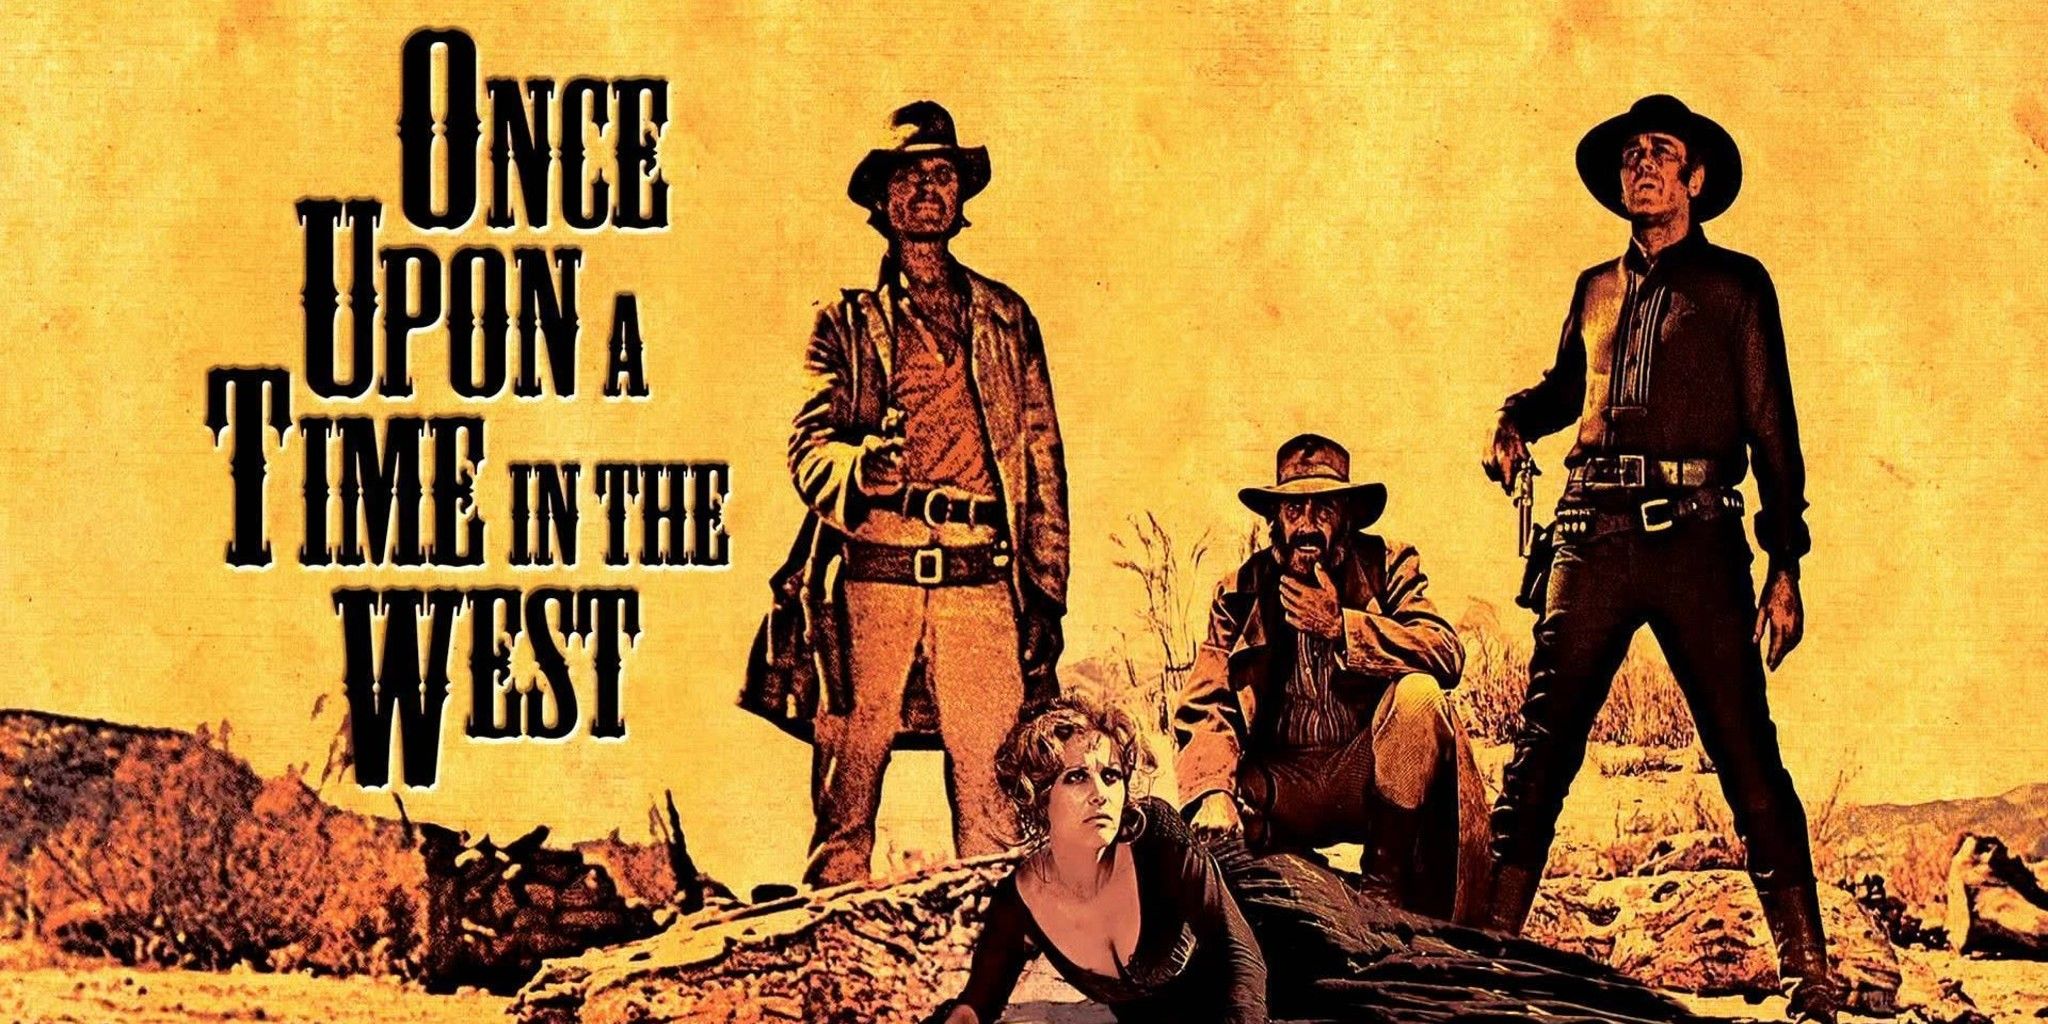 A poster of Sergio Leone's Once upon a time in the west